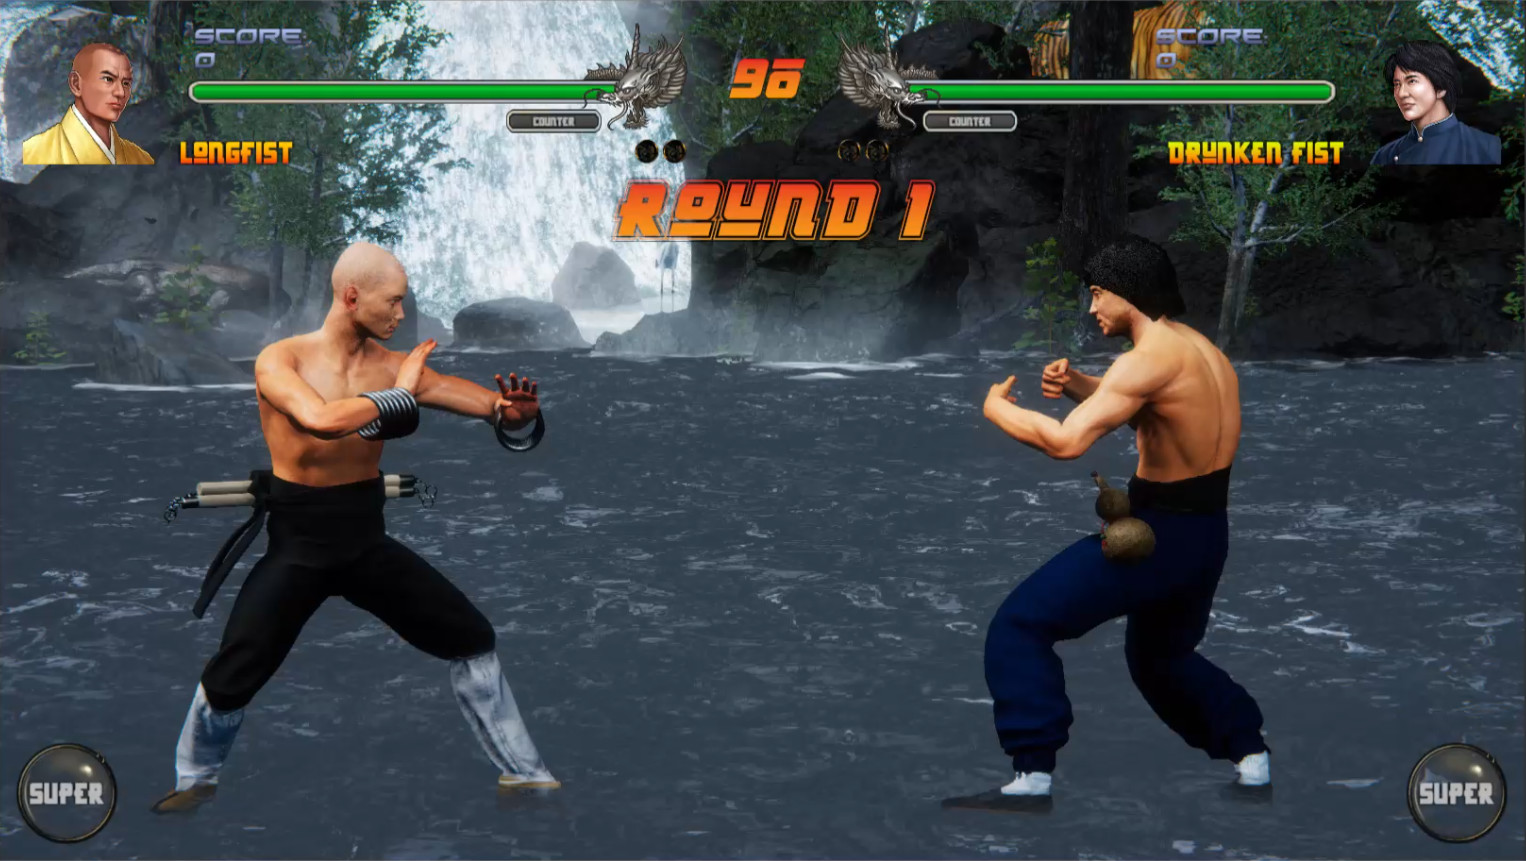 Play PlayStation Wu-Tang - Shaolin Style Online in your browser 